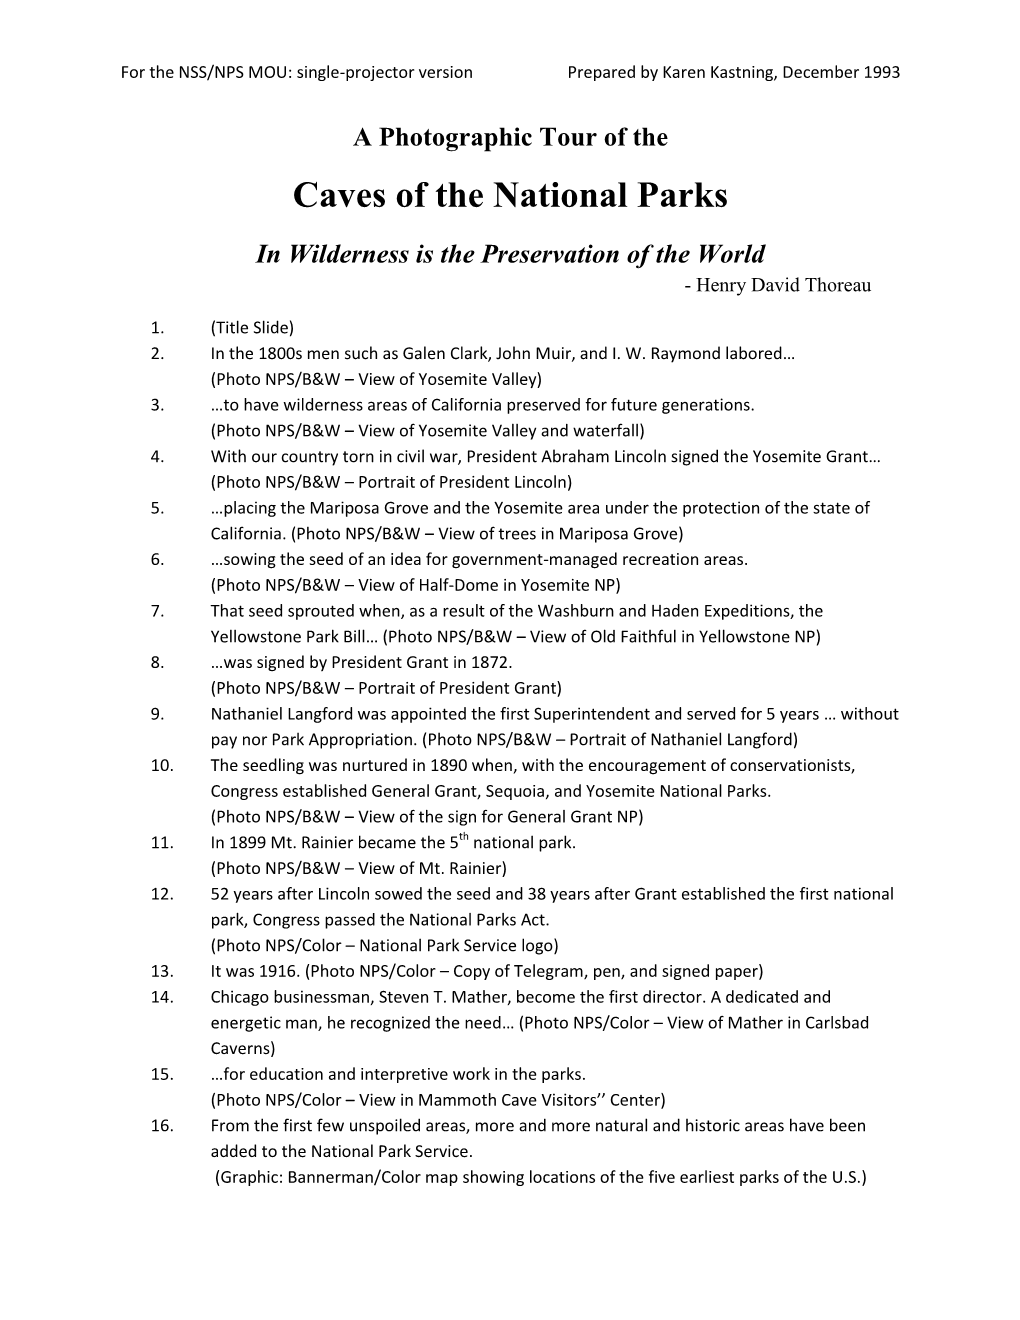 Caves of the National Parks